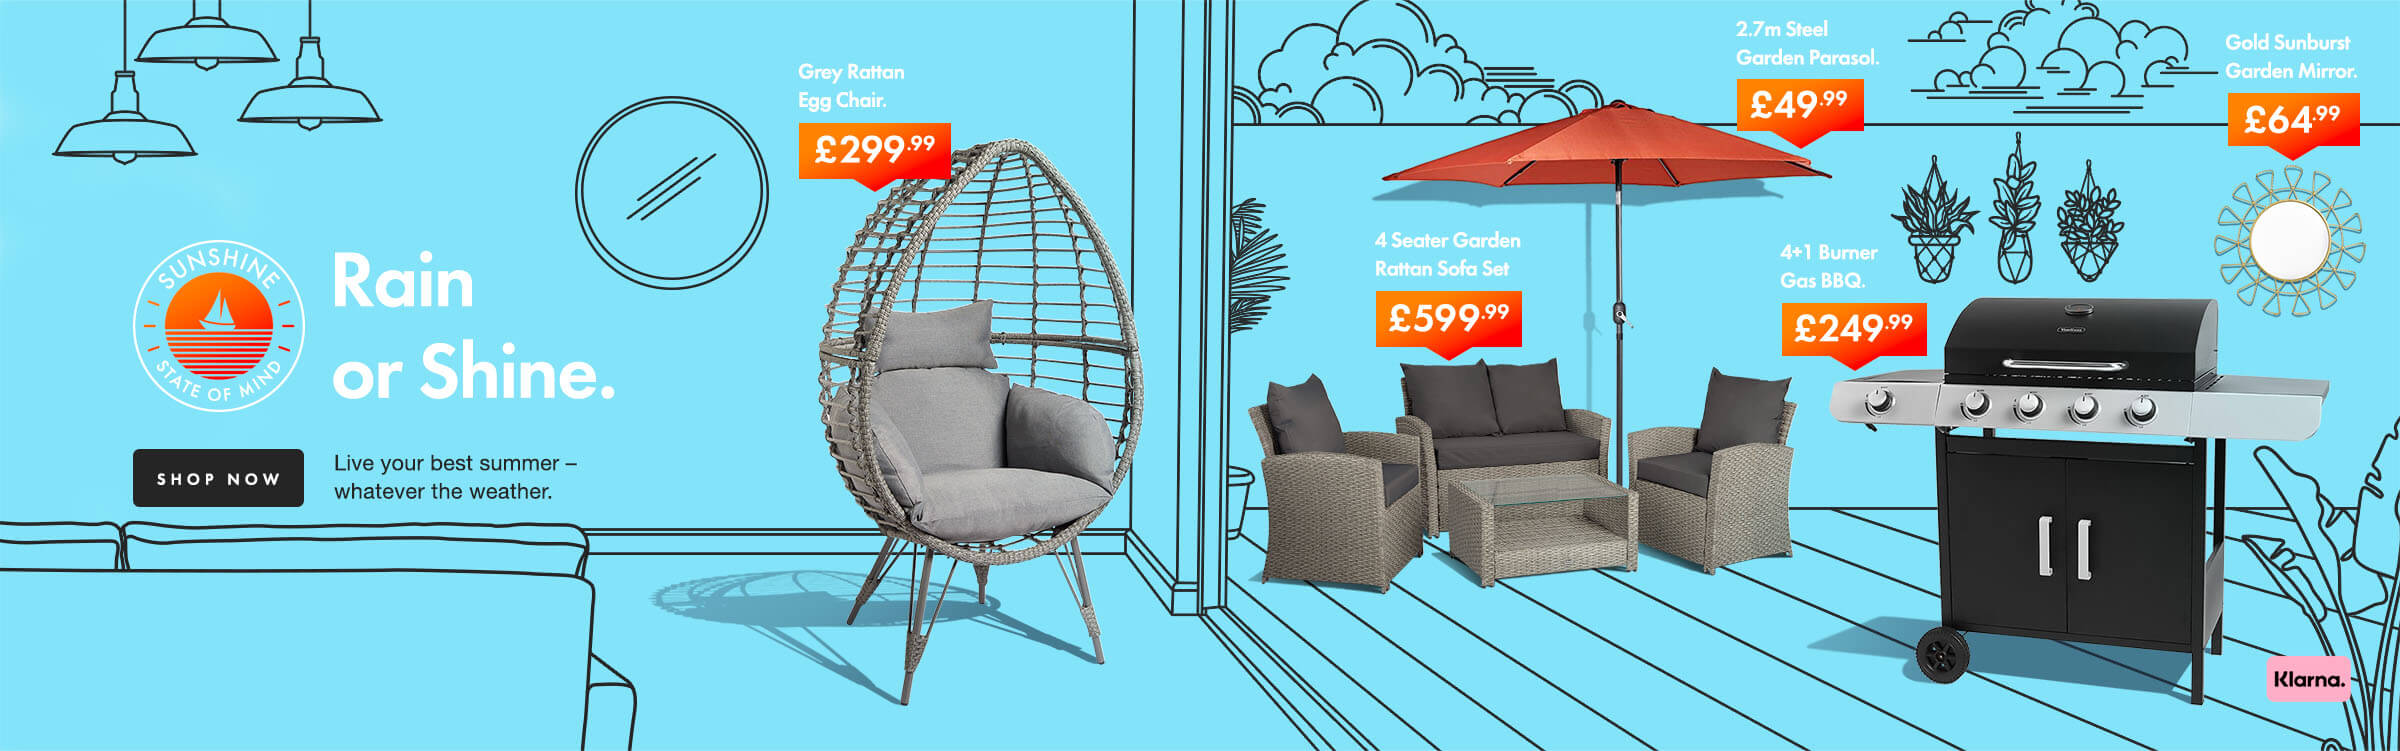 Rain or Shine. Live your best summer with our range of Garden Furniture. Shop Now 